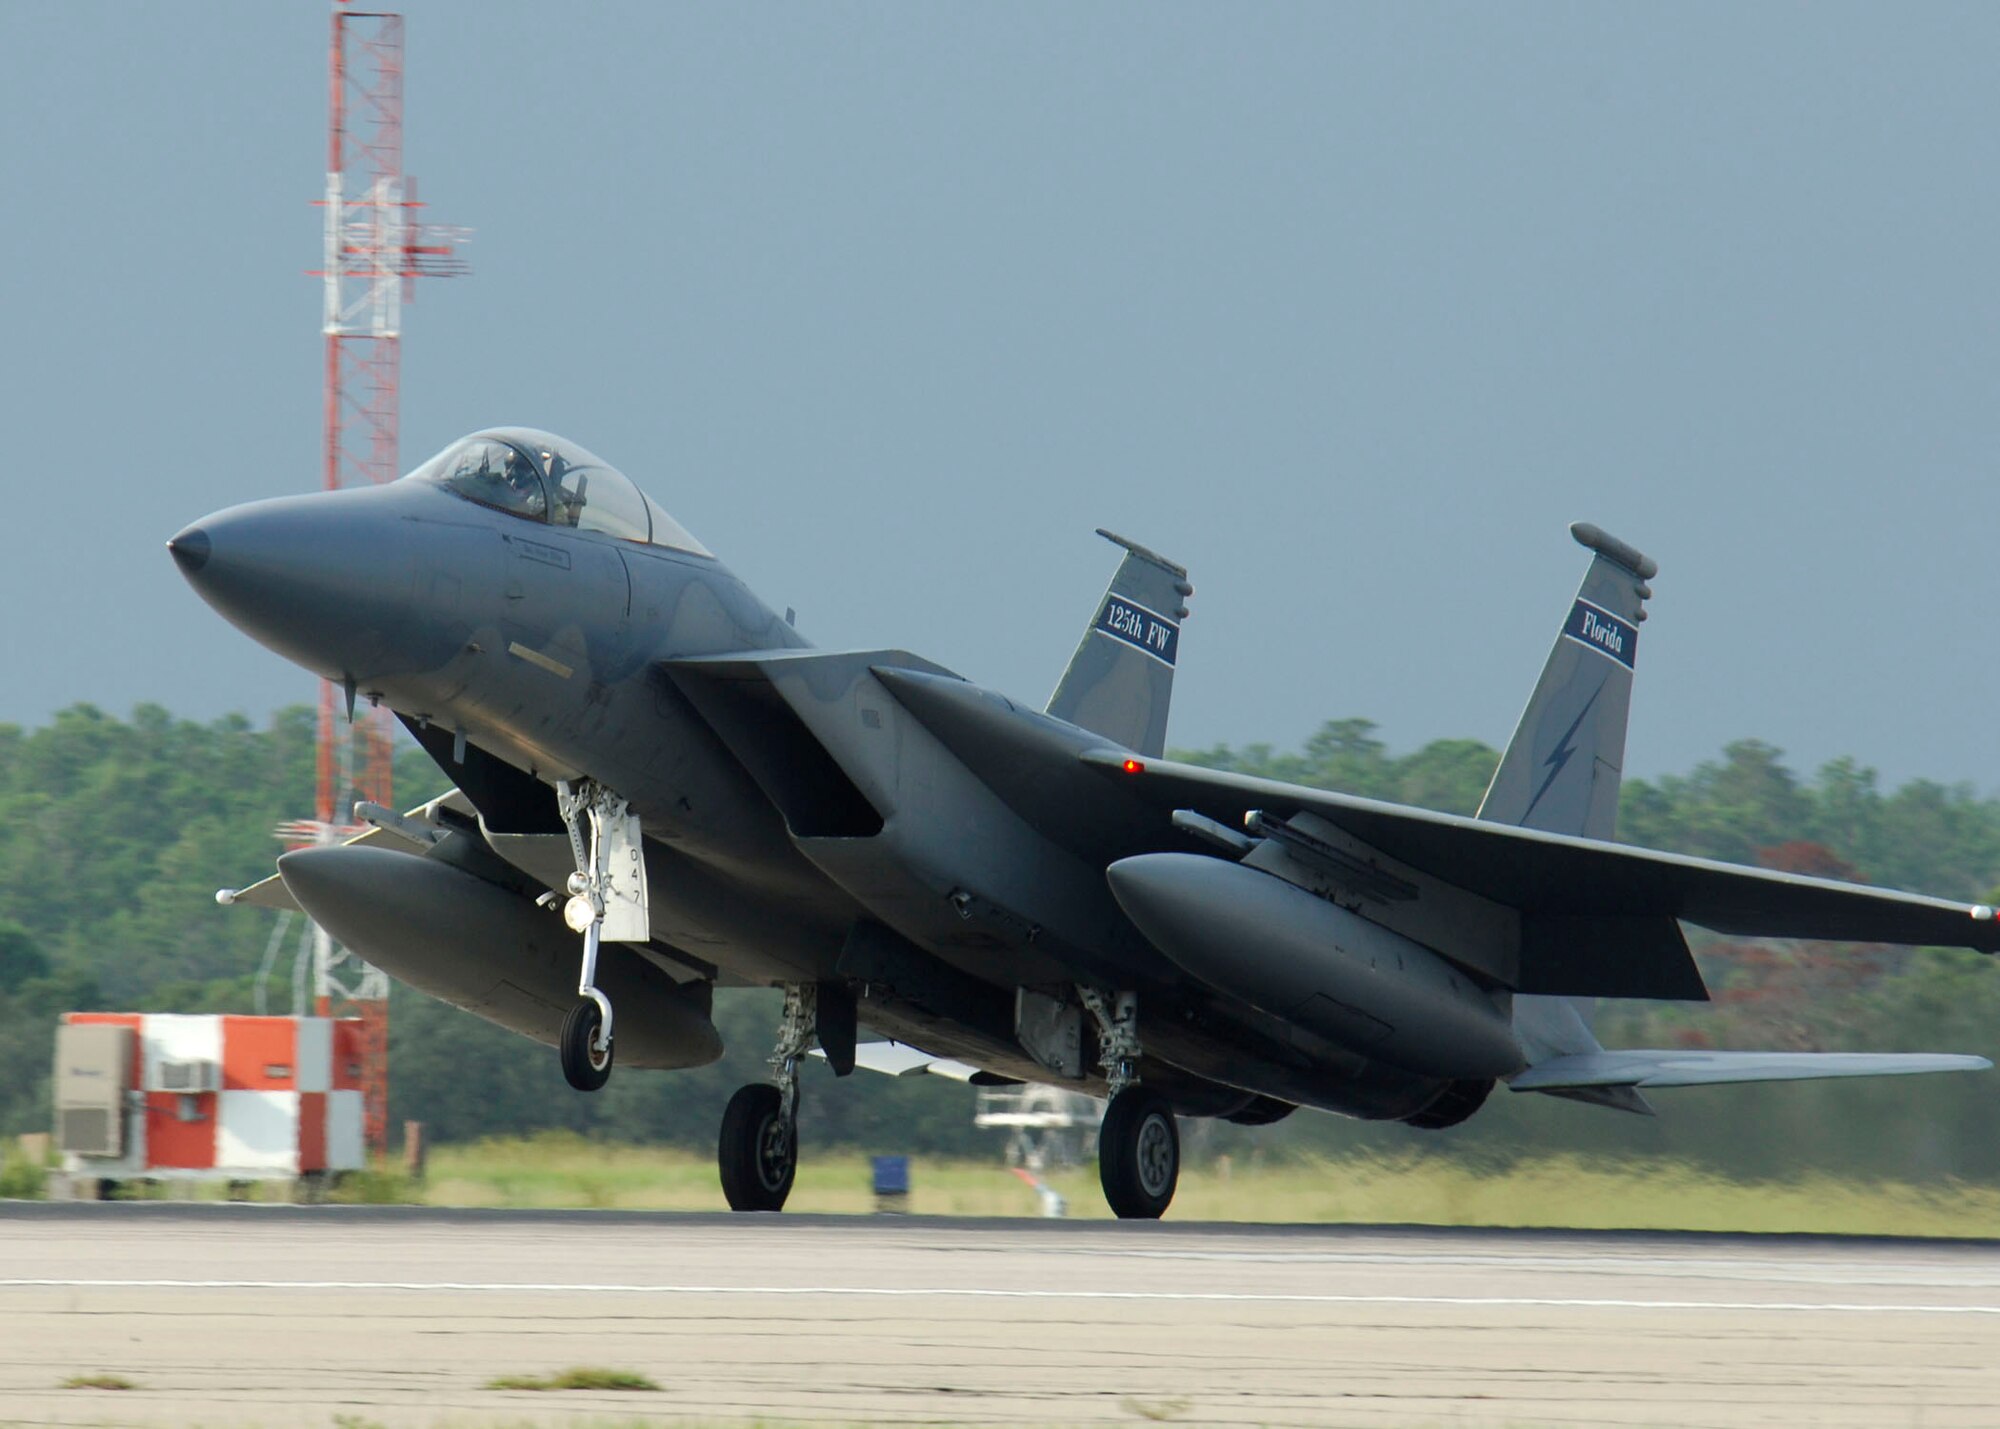 One of seven F-15 Eagles from the Florida Air National Guard's 125th Fighter Wing arrives at Eglin Air Force Base, Fla., Aug. 29. The aircraft were evacuated from Jacksonville International Airport because of Tropical Storm Ernesto. (U.S. Air Force photo/Joe Piccorossi) 
